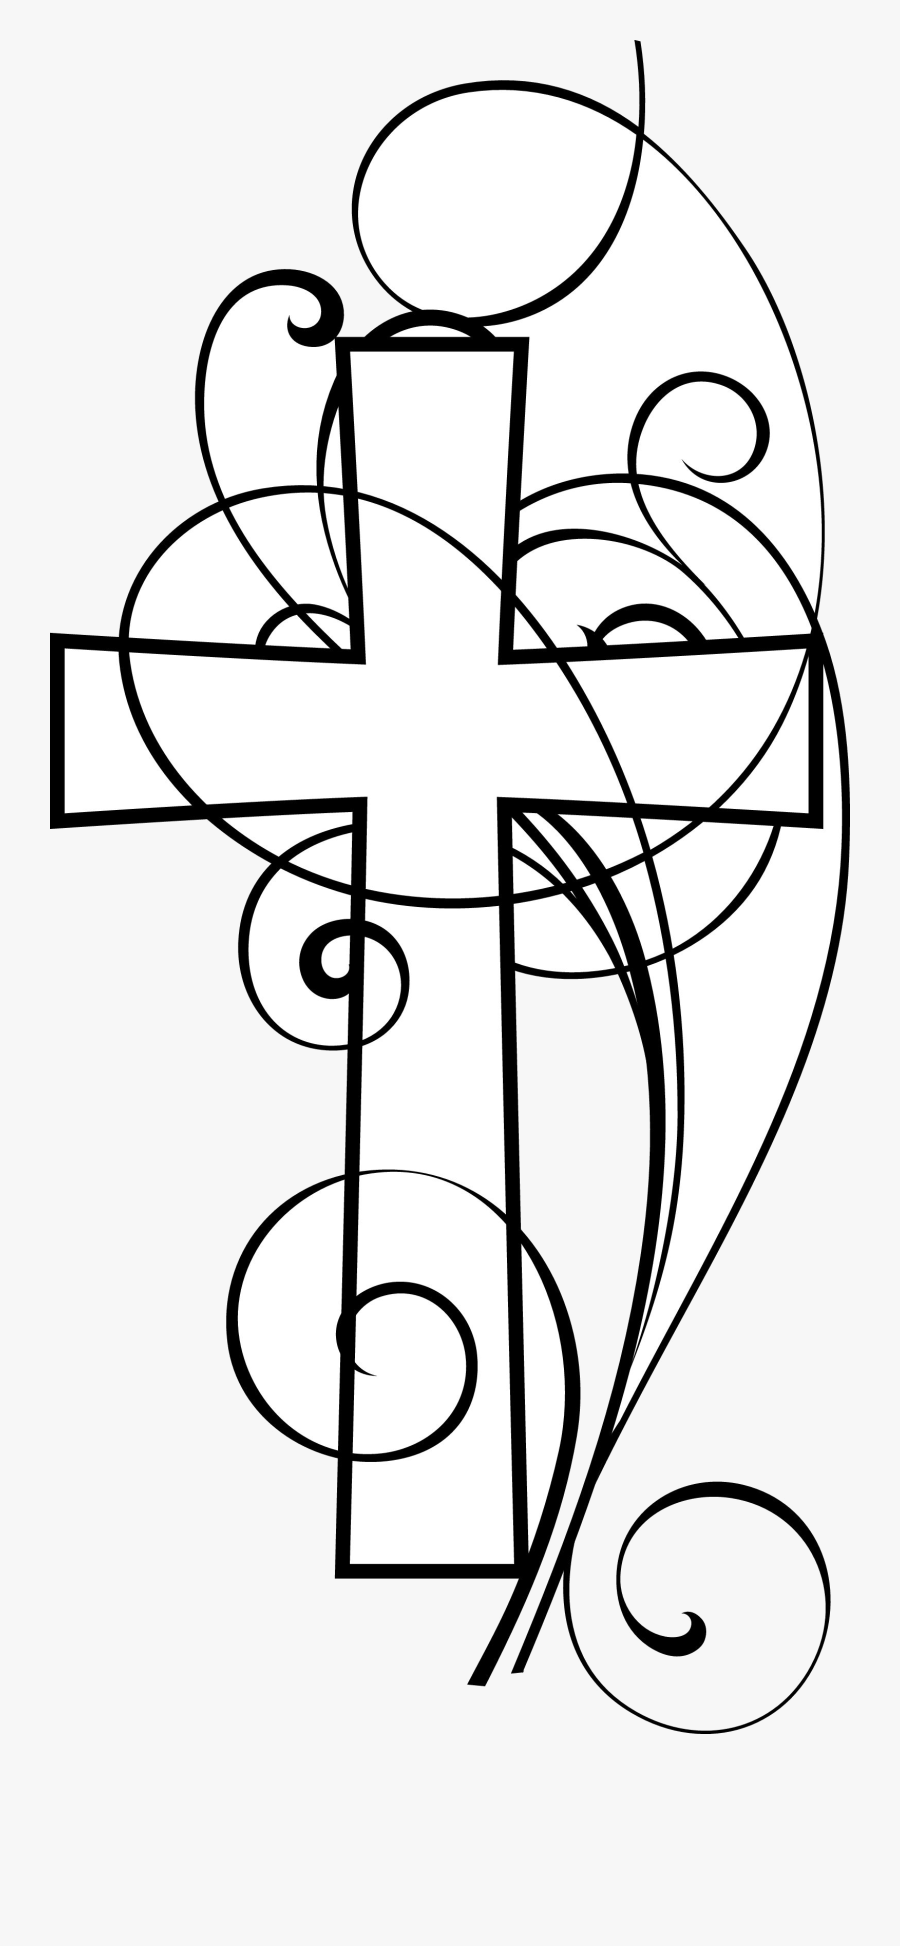 Cross Clipart Google Search Bible Teaching Resources - Cross Image Black And White, Transparent Clipart